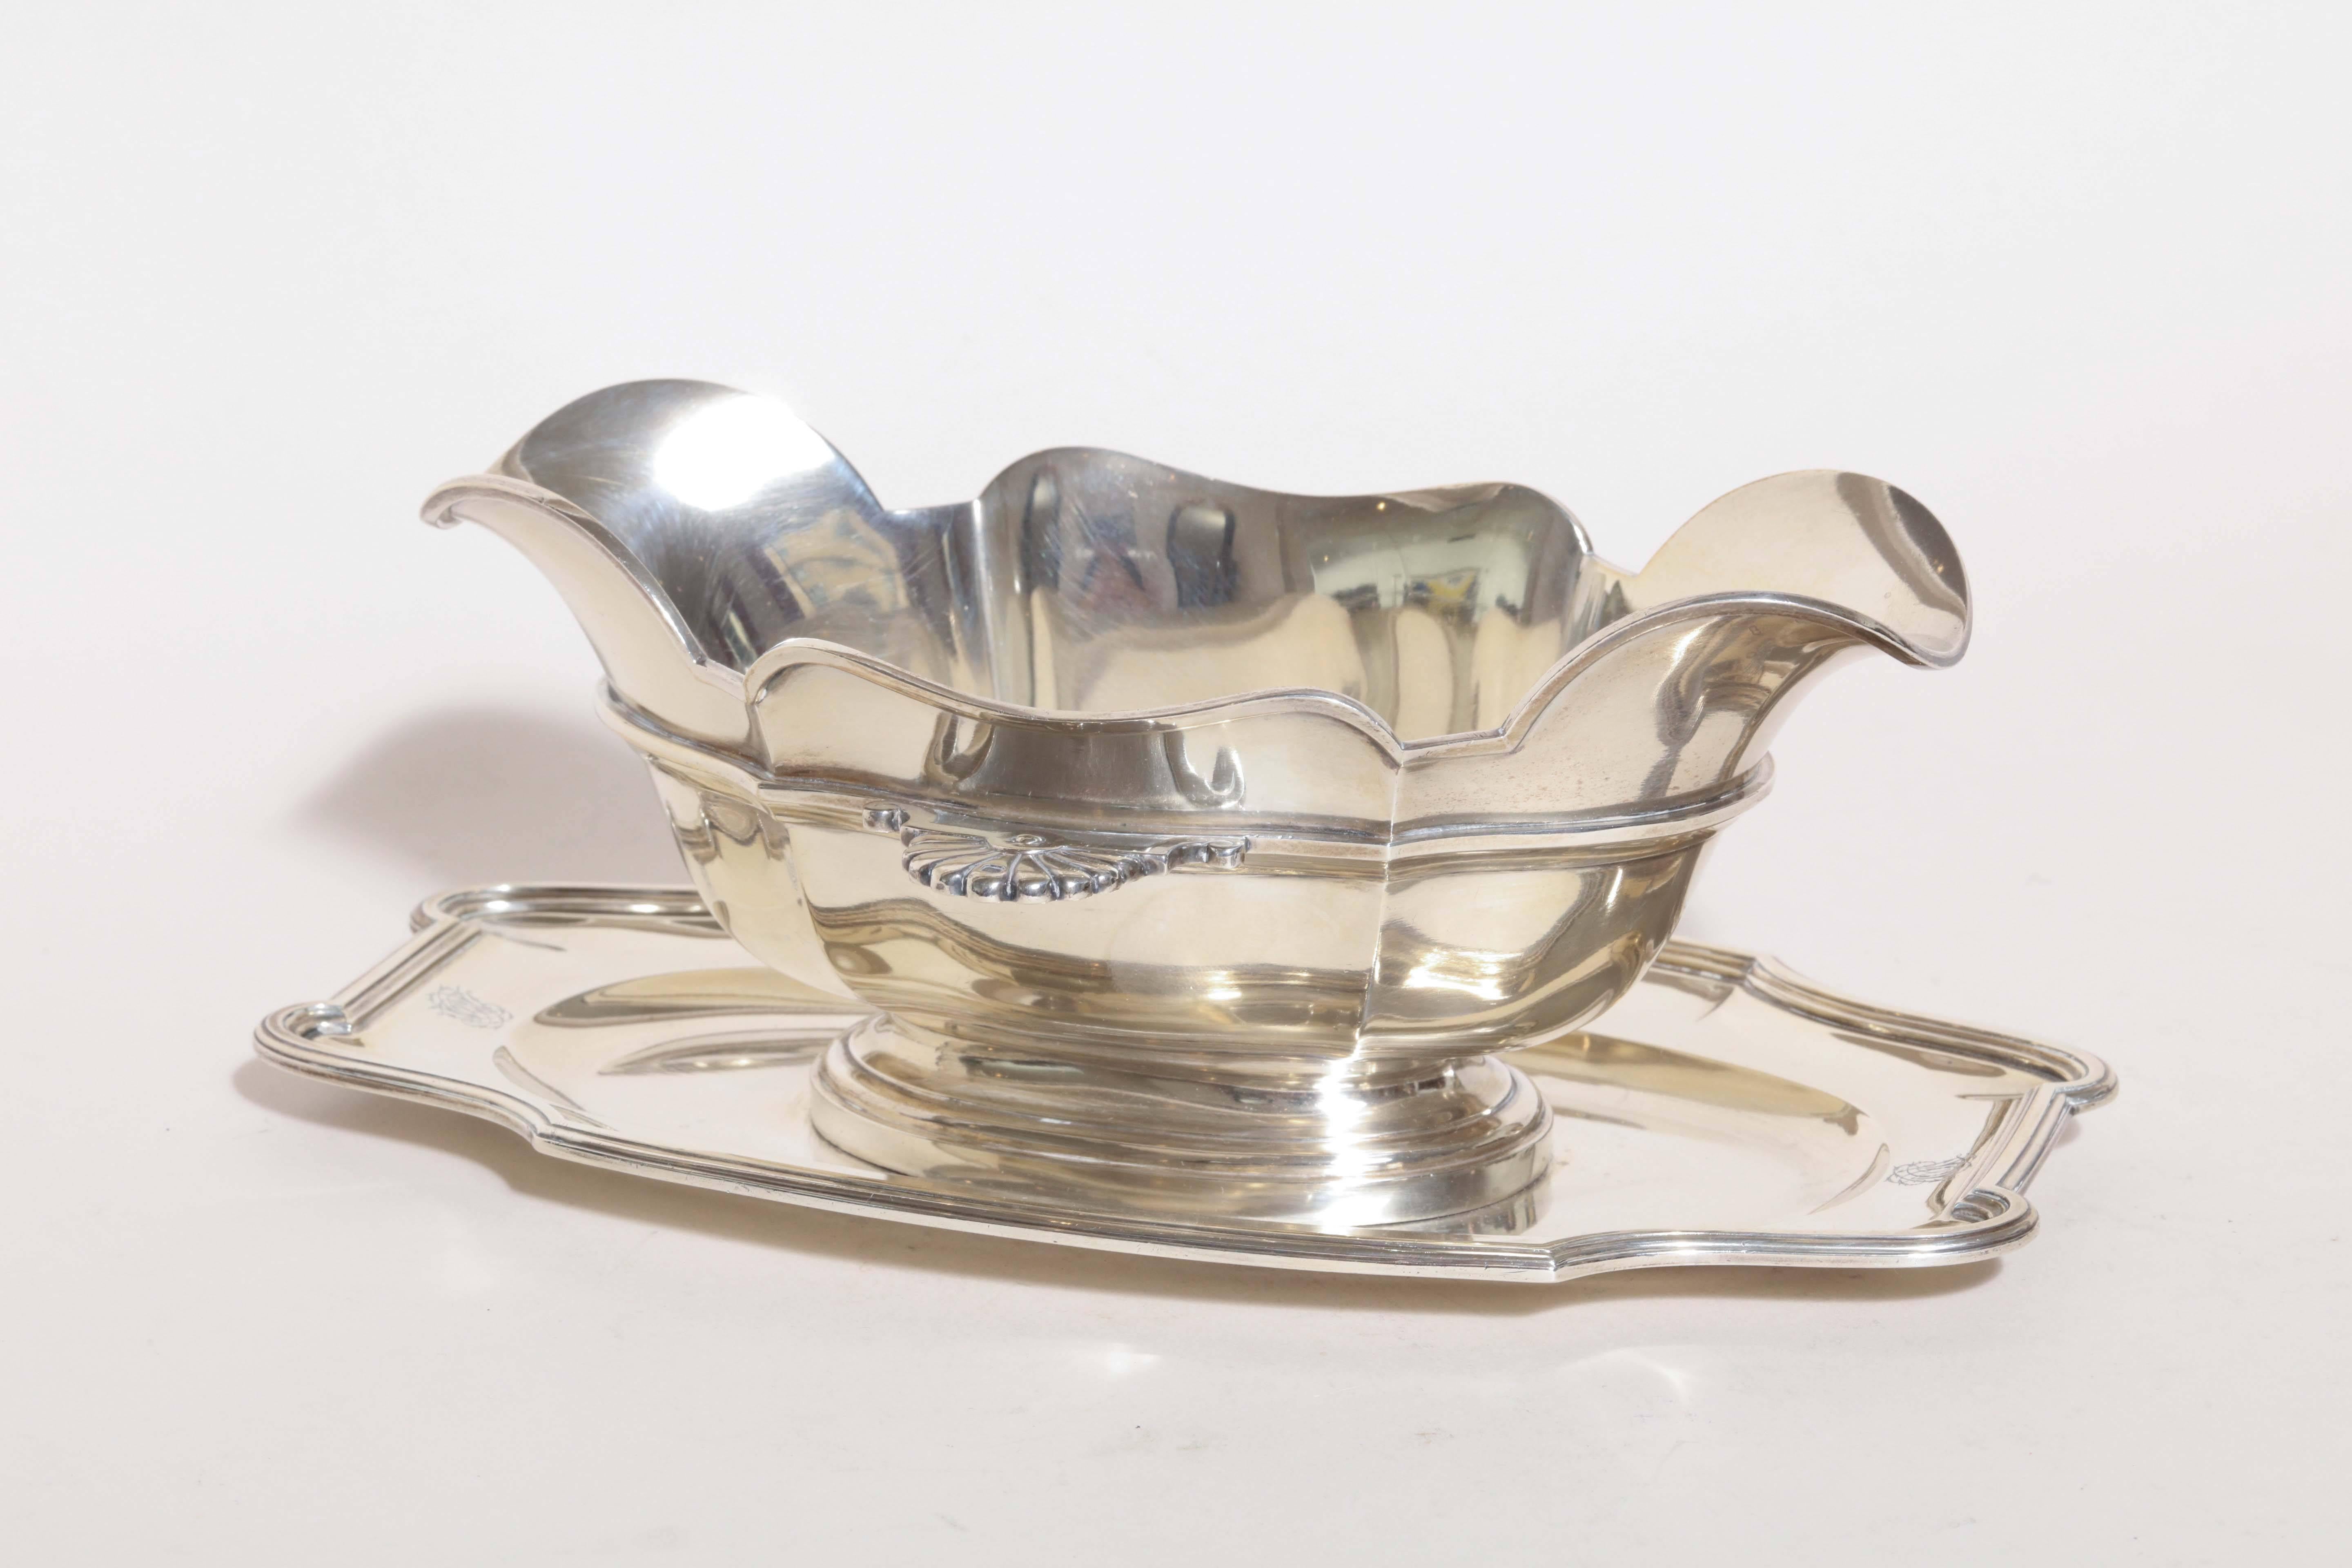 Robert Linzeler French Art Deco Silver Sauciere Mounted on Tray For Sale 2